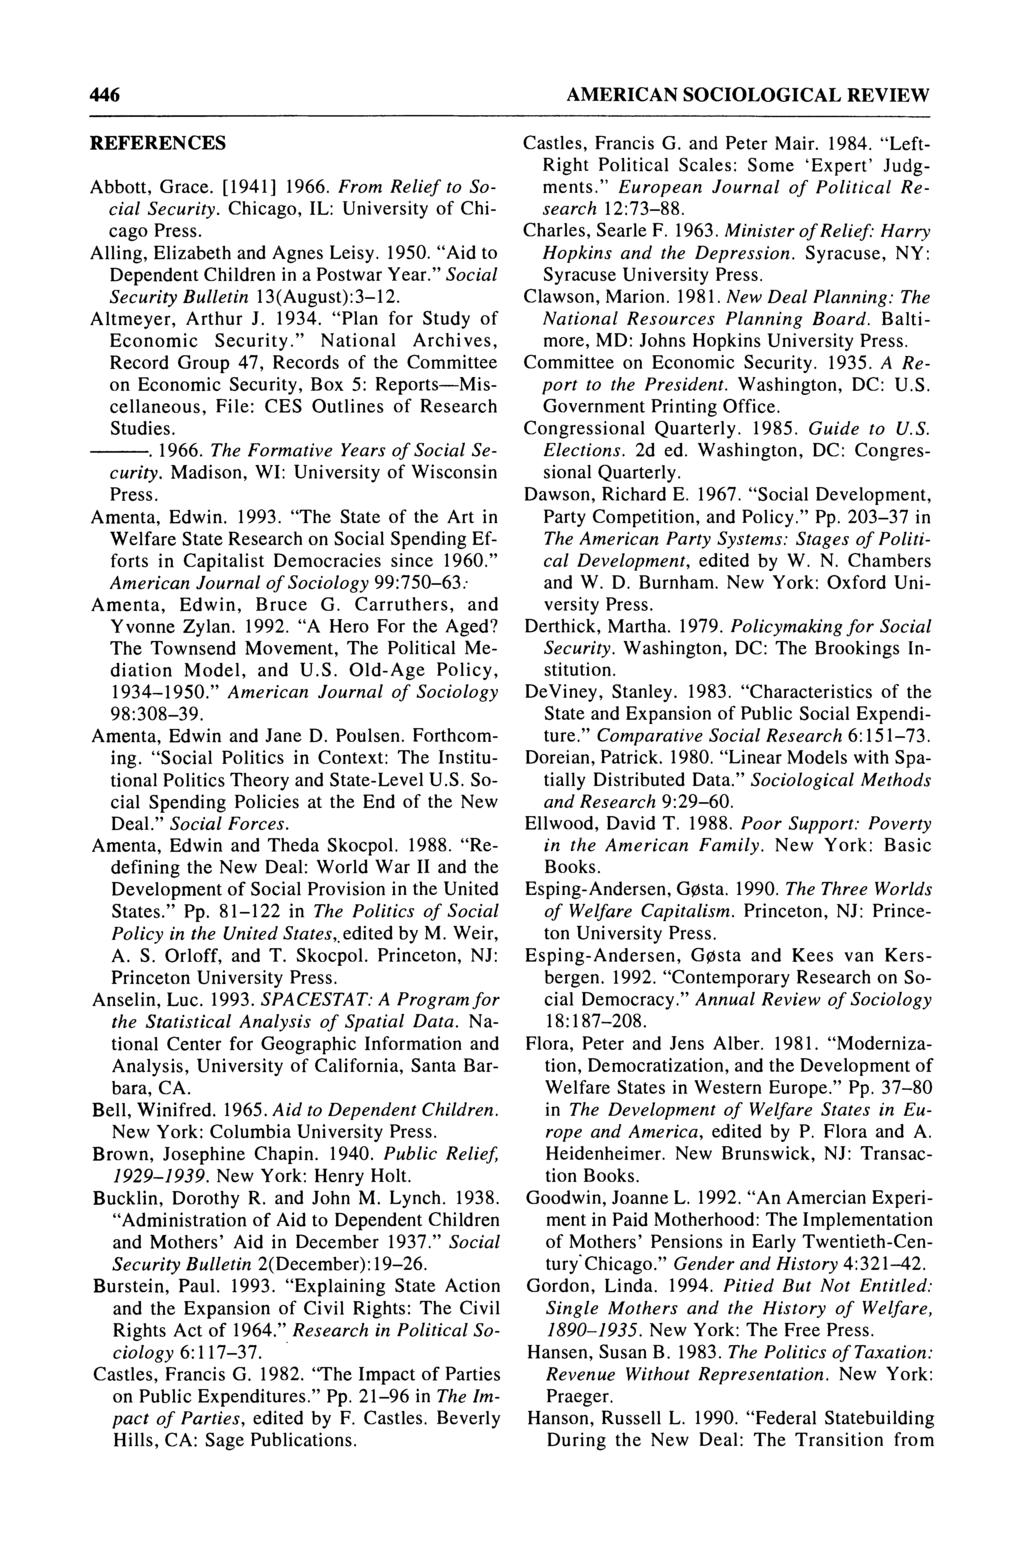 AMERICAN SOCIO1,OGICAL REVIEW REFERENCES Abbott, Grace. [I9411 1966. From Relief to Social Security. Chicago, IL: University of Chicago Press. Alling, Elizabeth and Agnes Leisy. 1950.